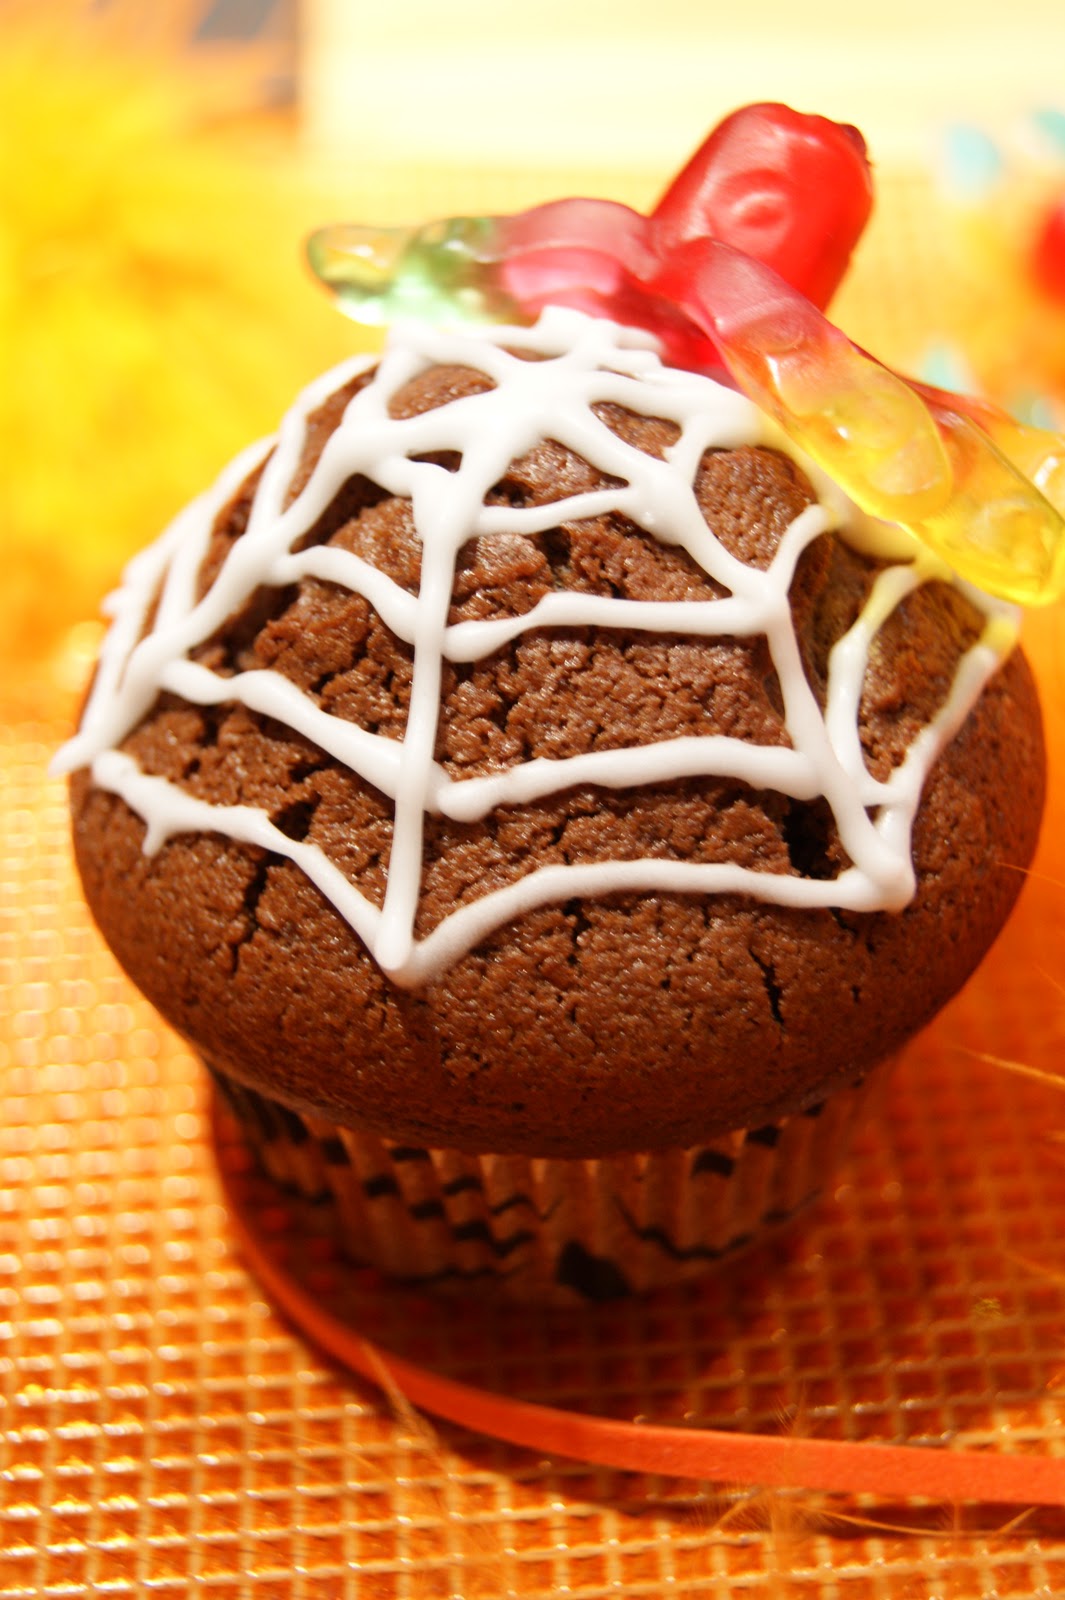 Tchoup&amp;#39; Cooking: Les muffins, les muffins, d&amp;#39;Halloween!!!!!